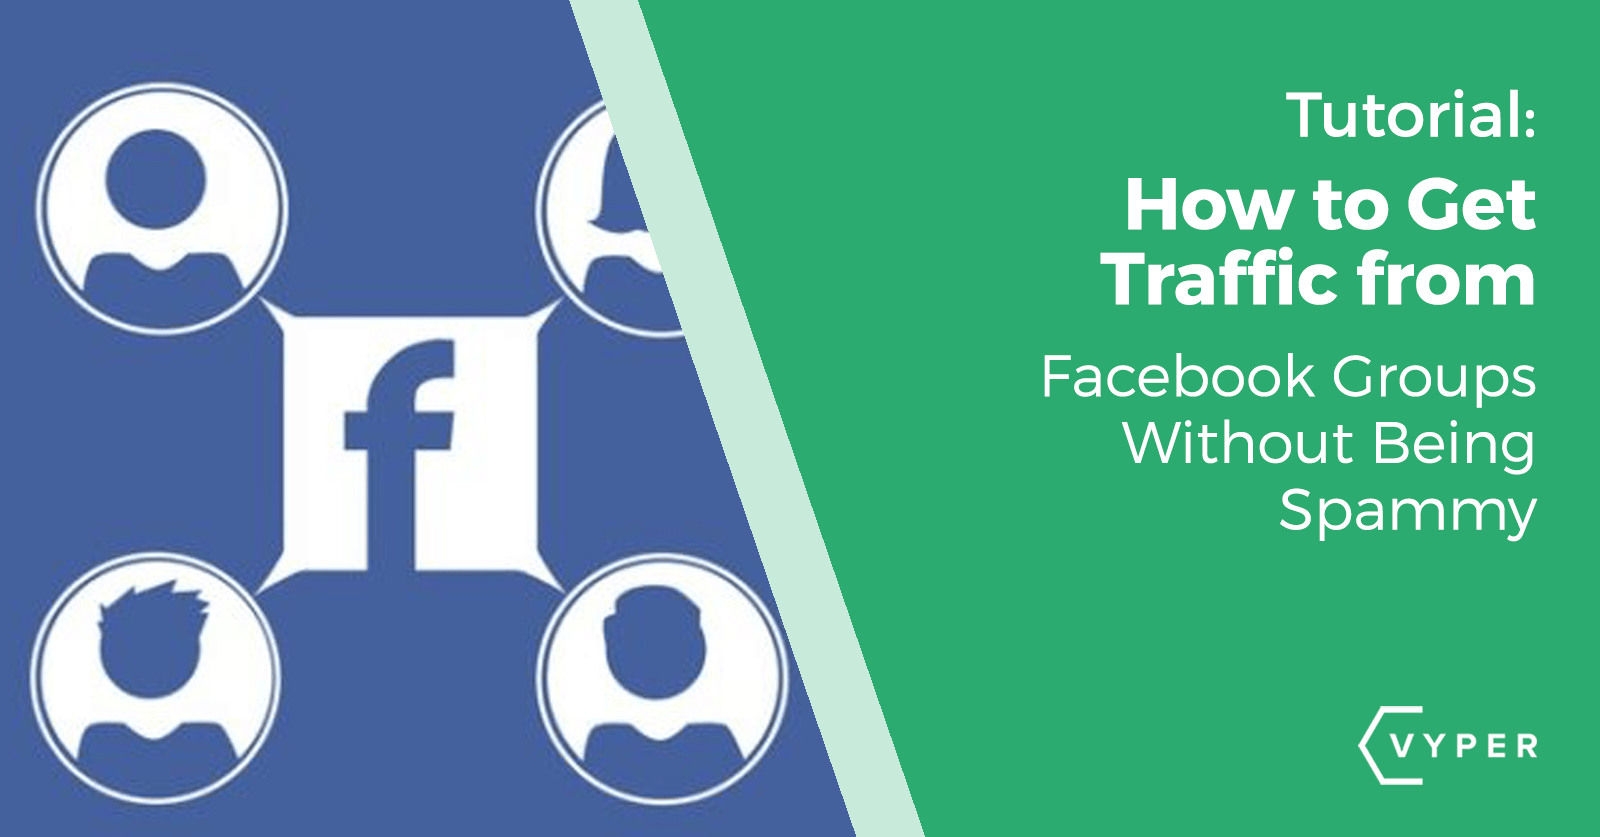 How to Get Traffic from Facebook Groups (without Being Spammy)